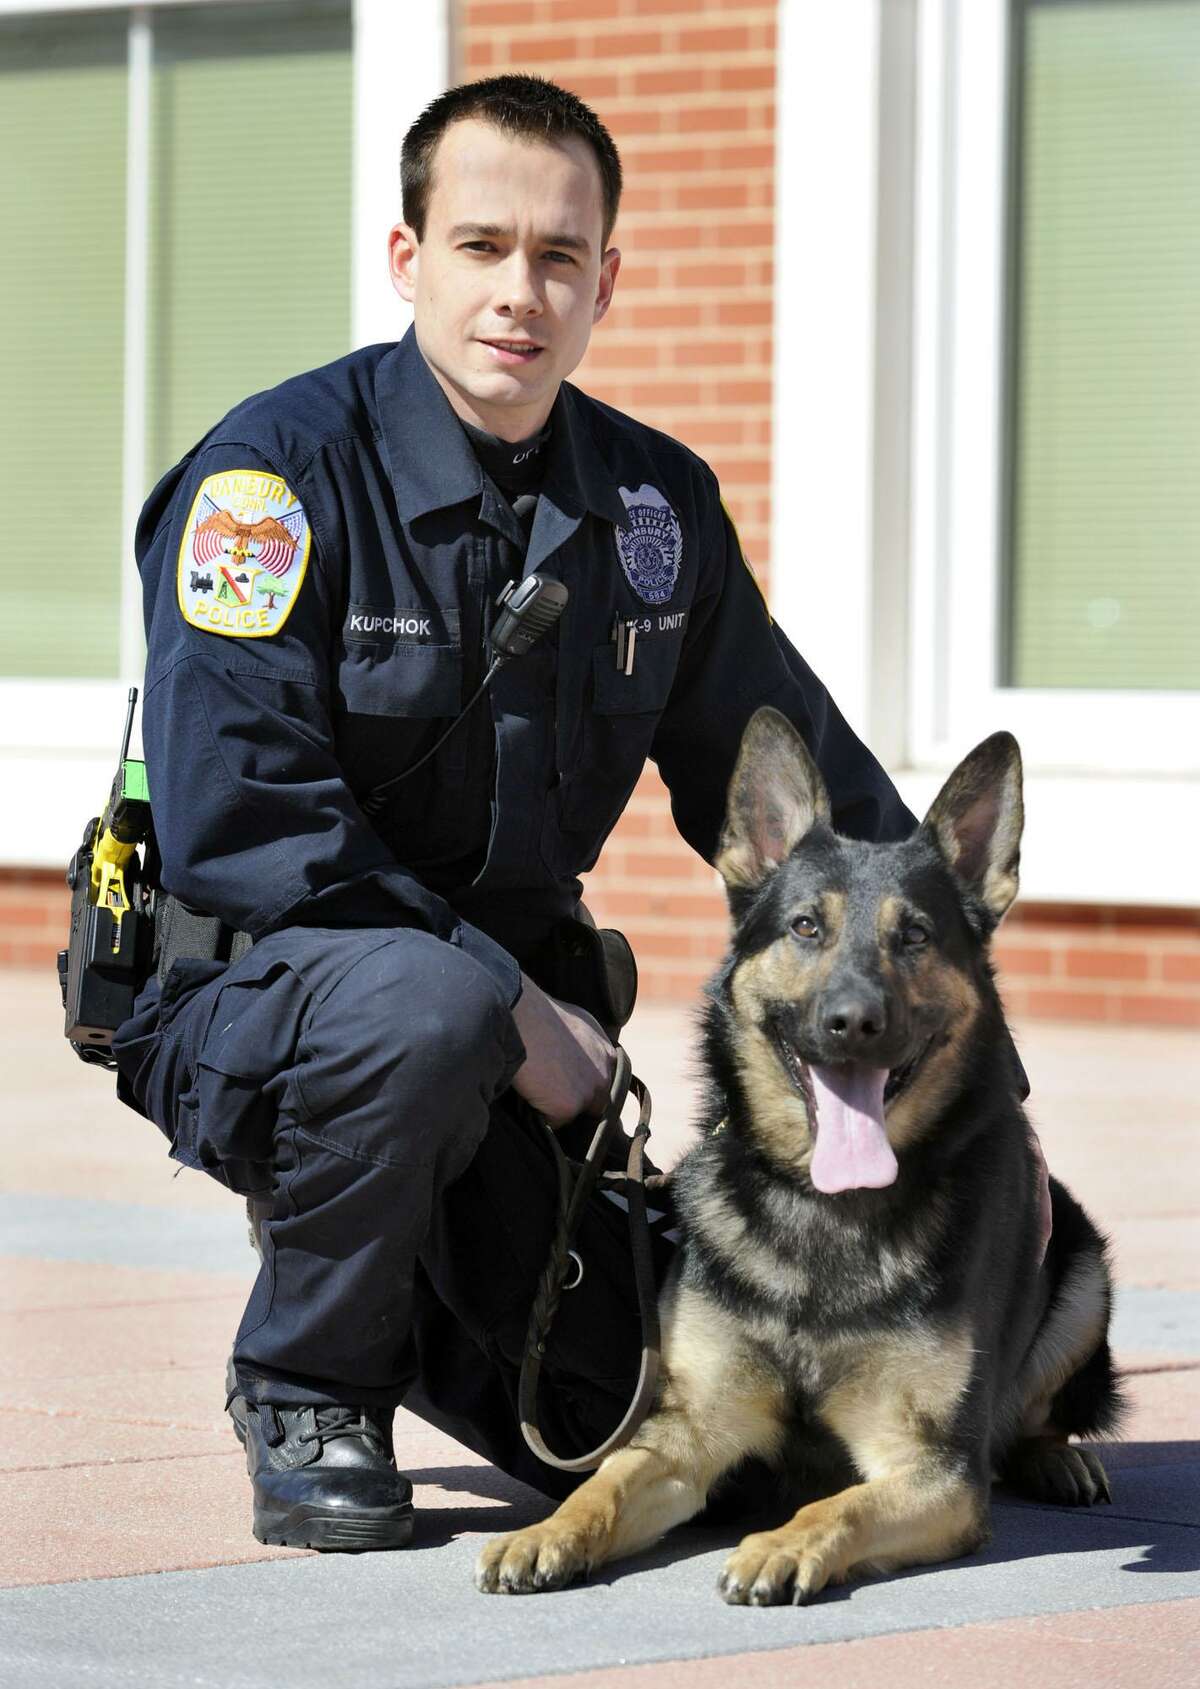 File photo of Danbury Police Officer Travis Kupchok crouches with Koda, his canine partner, Tuesday, March 6, 2012.